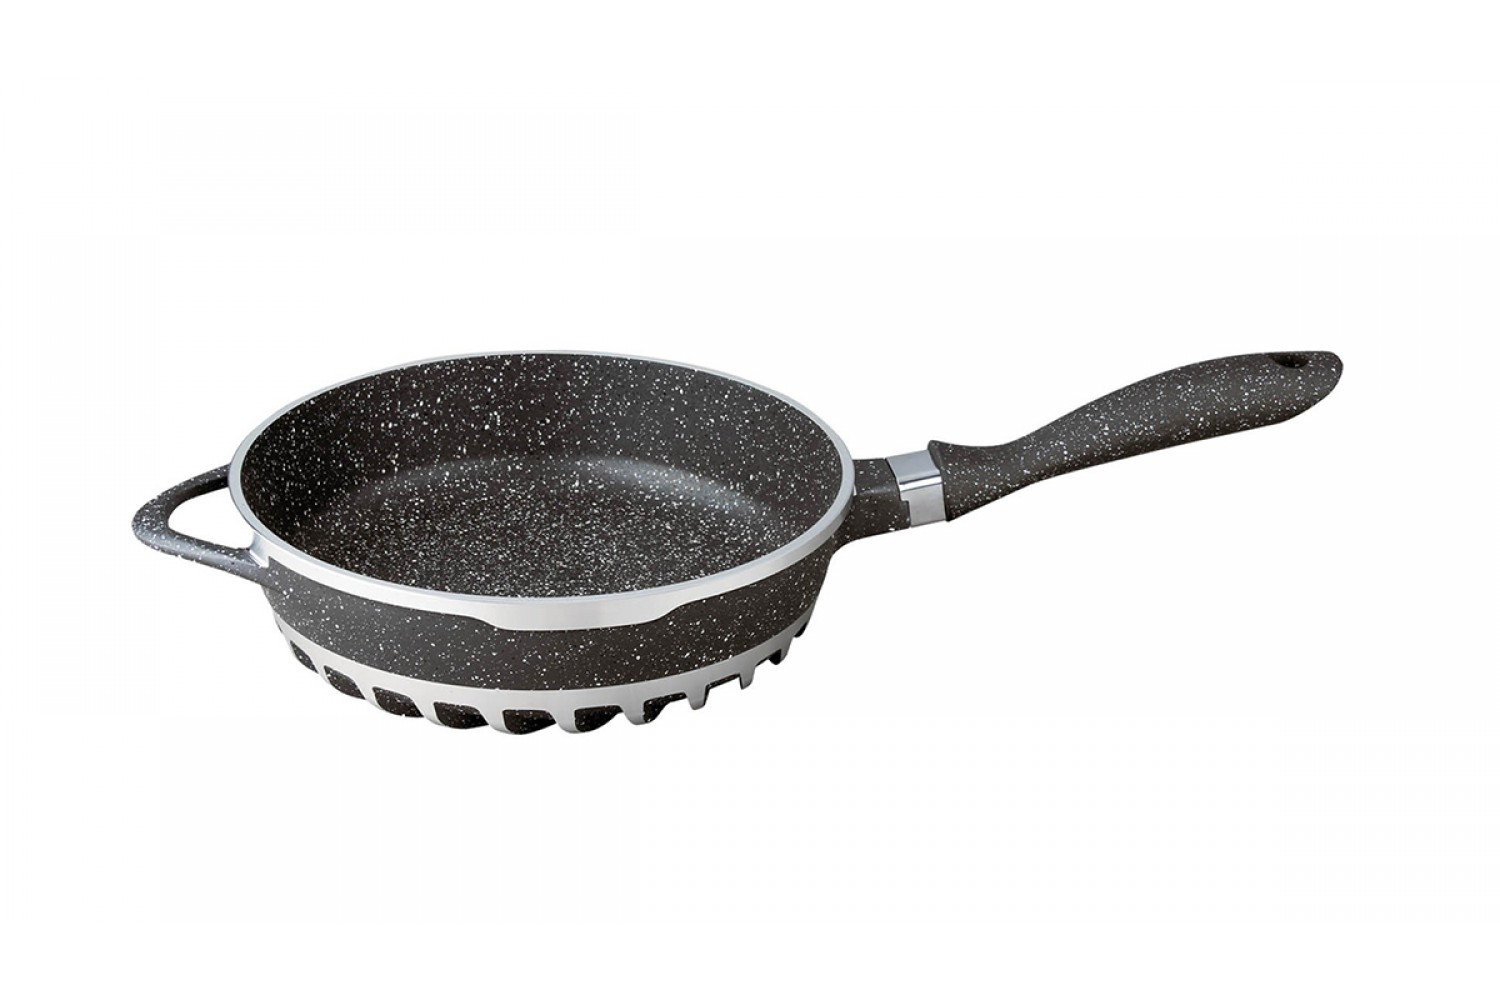 CYCLONE 11 DEEP FRY PAN WITHOUT GLASS LID